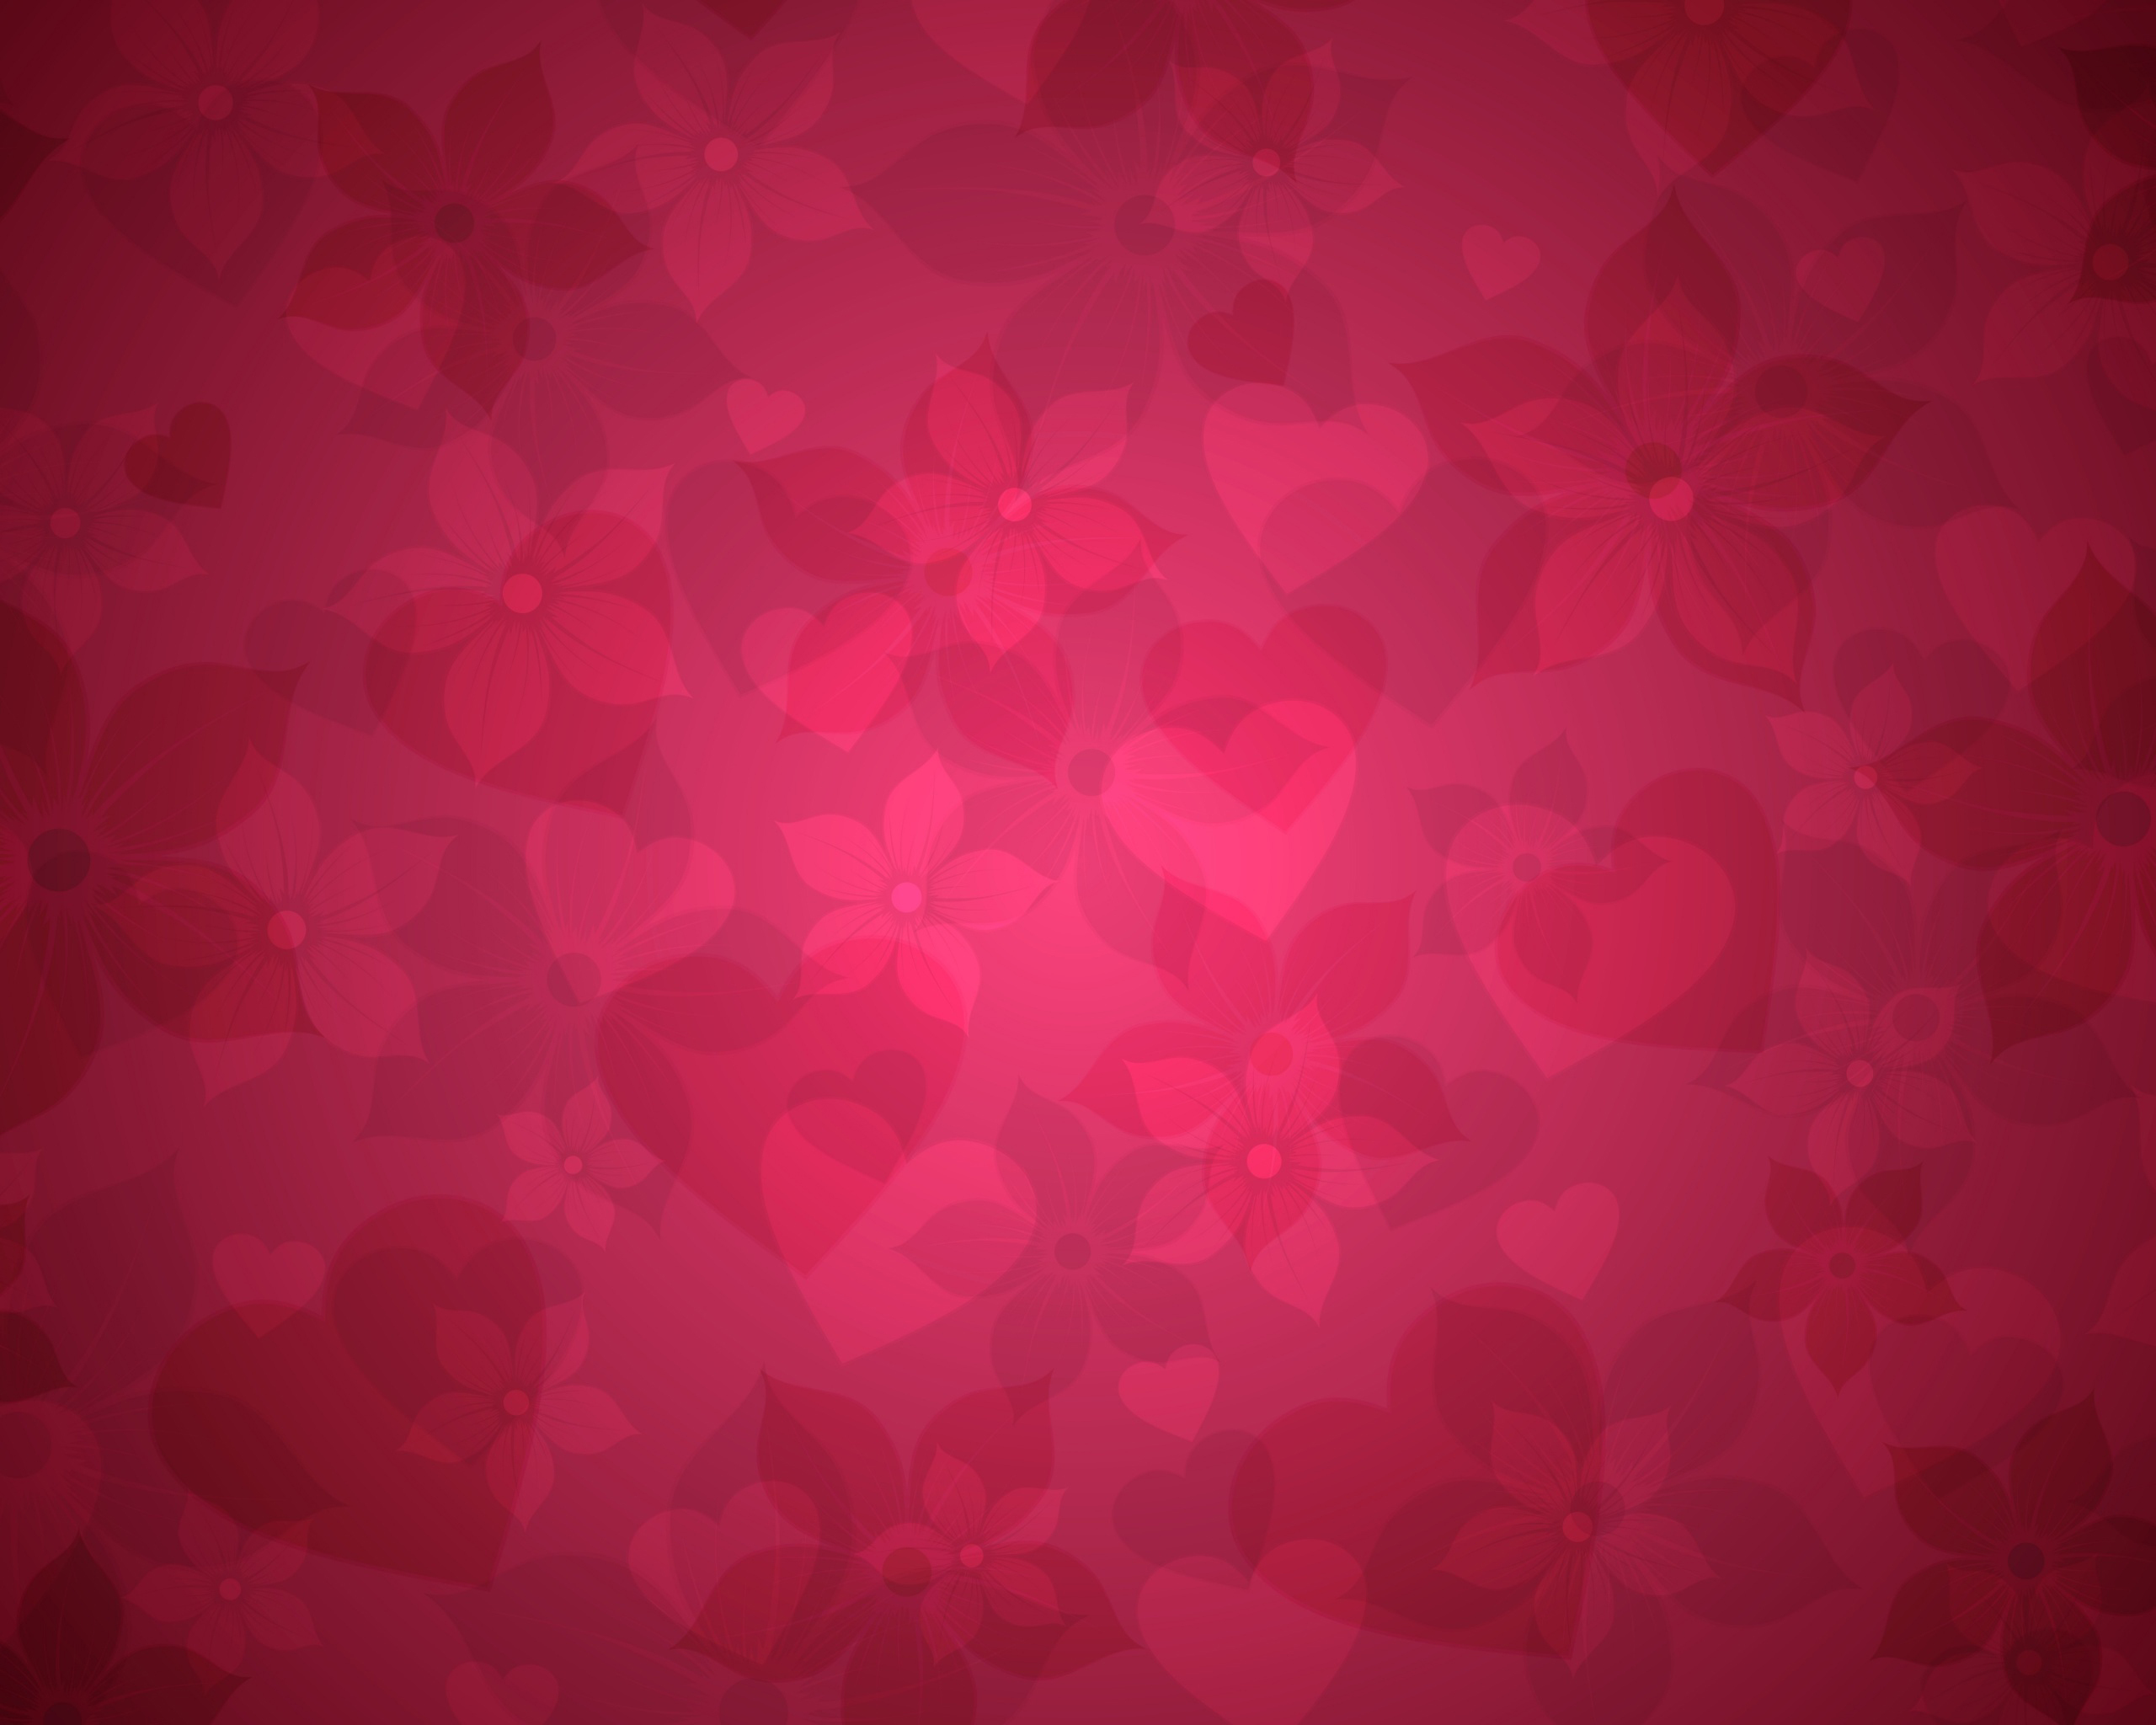 Texture Pink Hearts Flowers Background Wallpaper